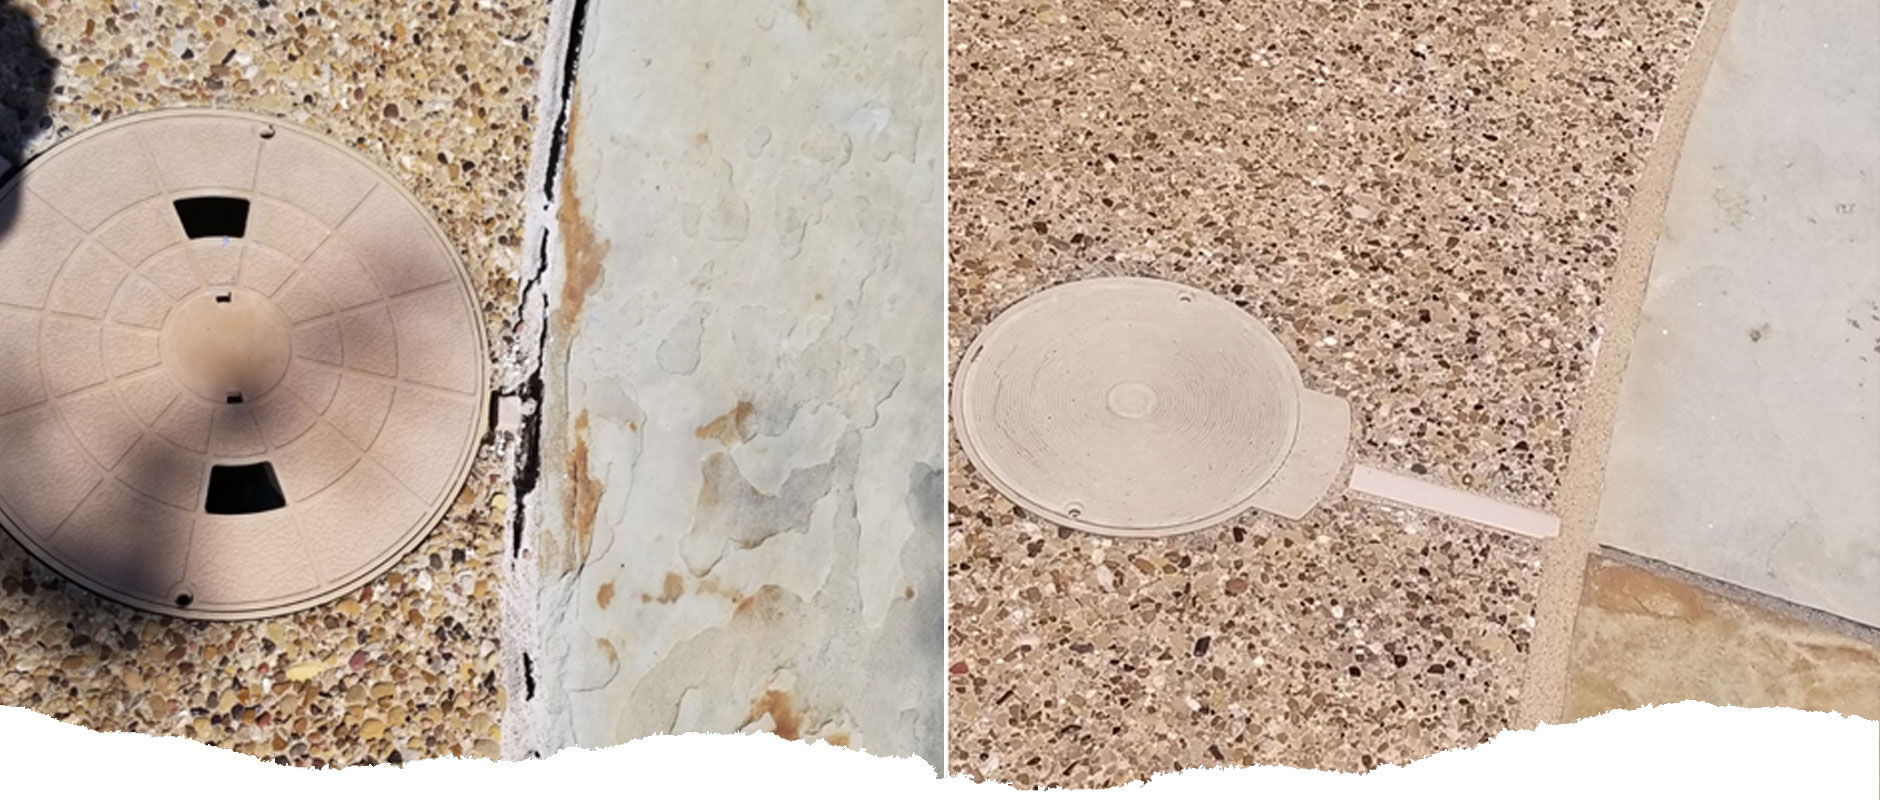 Side by side pictures of damaged pool mastic and new or repaired mastic to show the differences.